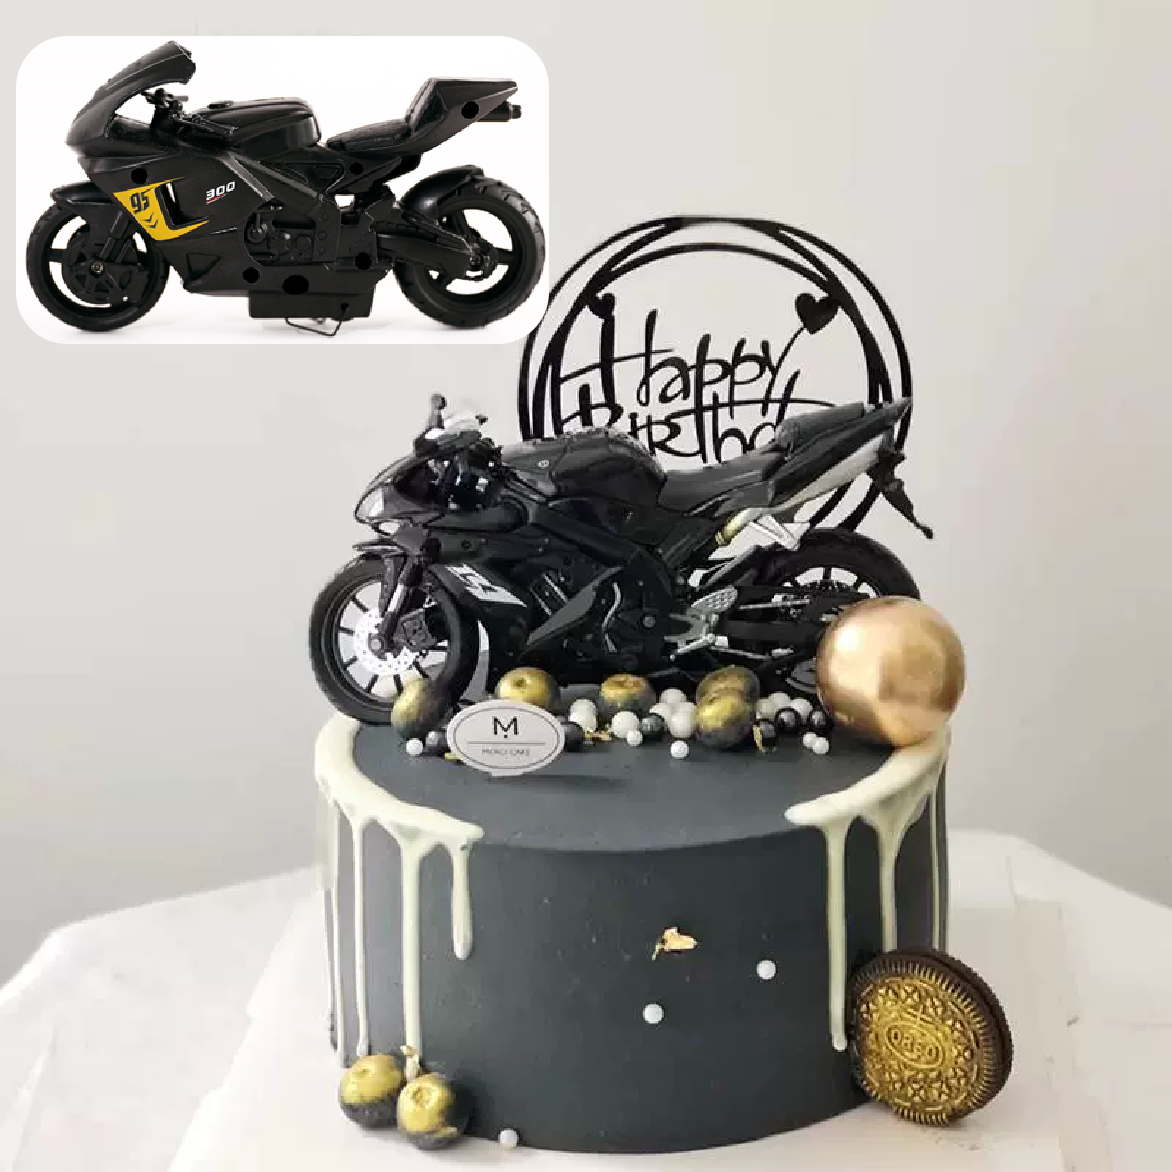 Amazon.com: Biker Silhouette Chopper Motorcycle Personalized Cake Topper  Birthday Cake Topper For Men Customized HD Biker | Solid Color Cake Toppers  : Grocery & Gourmet Food